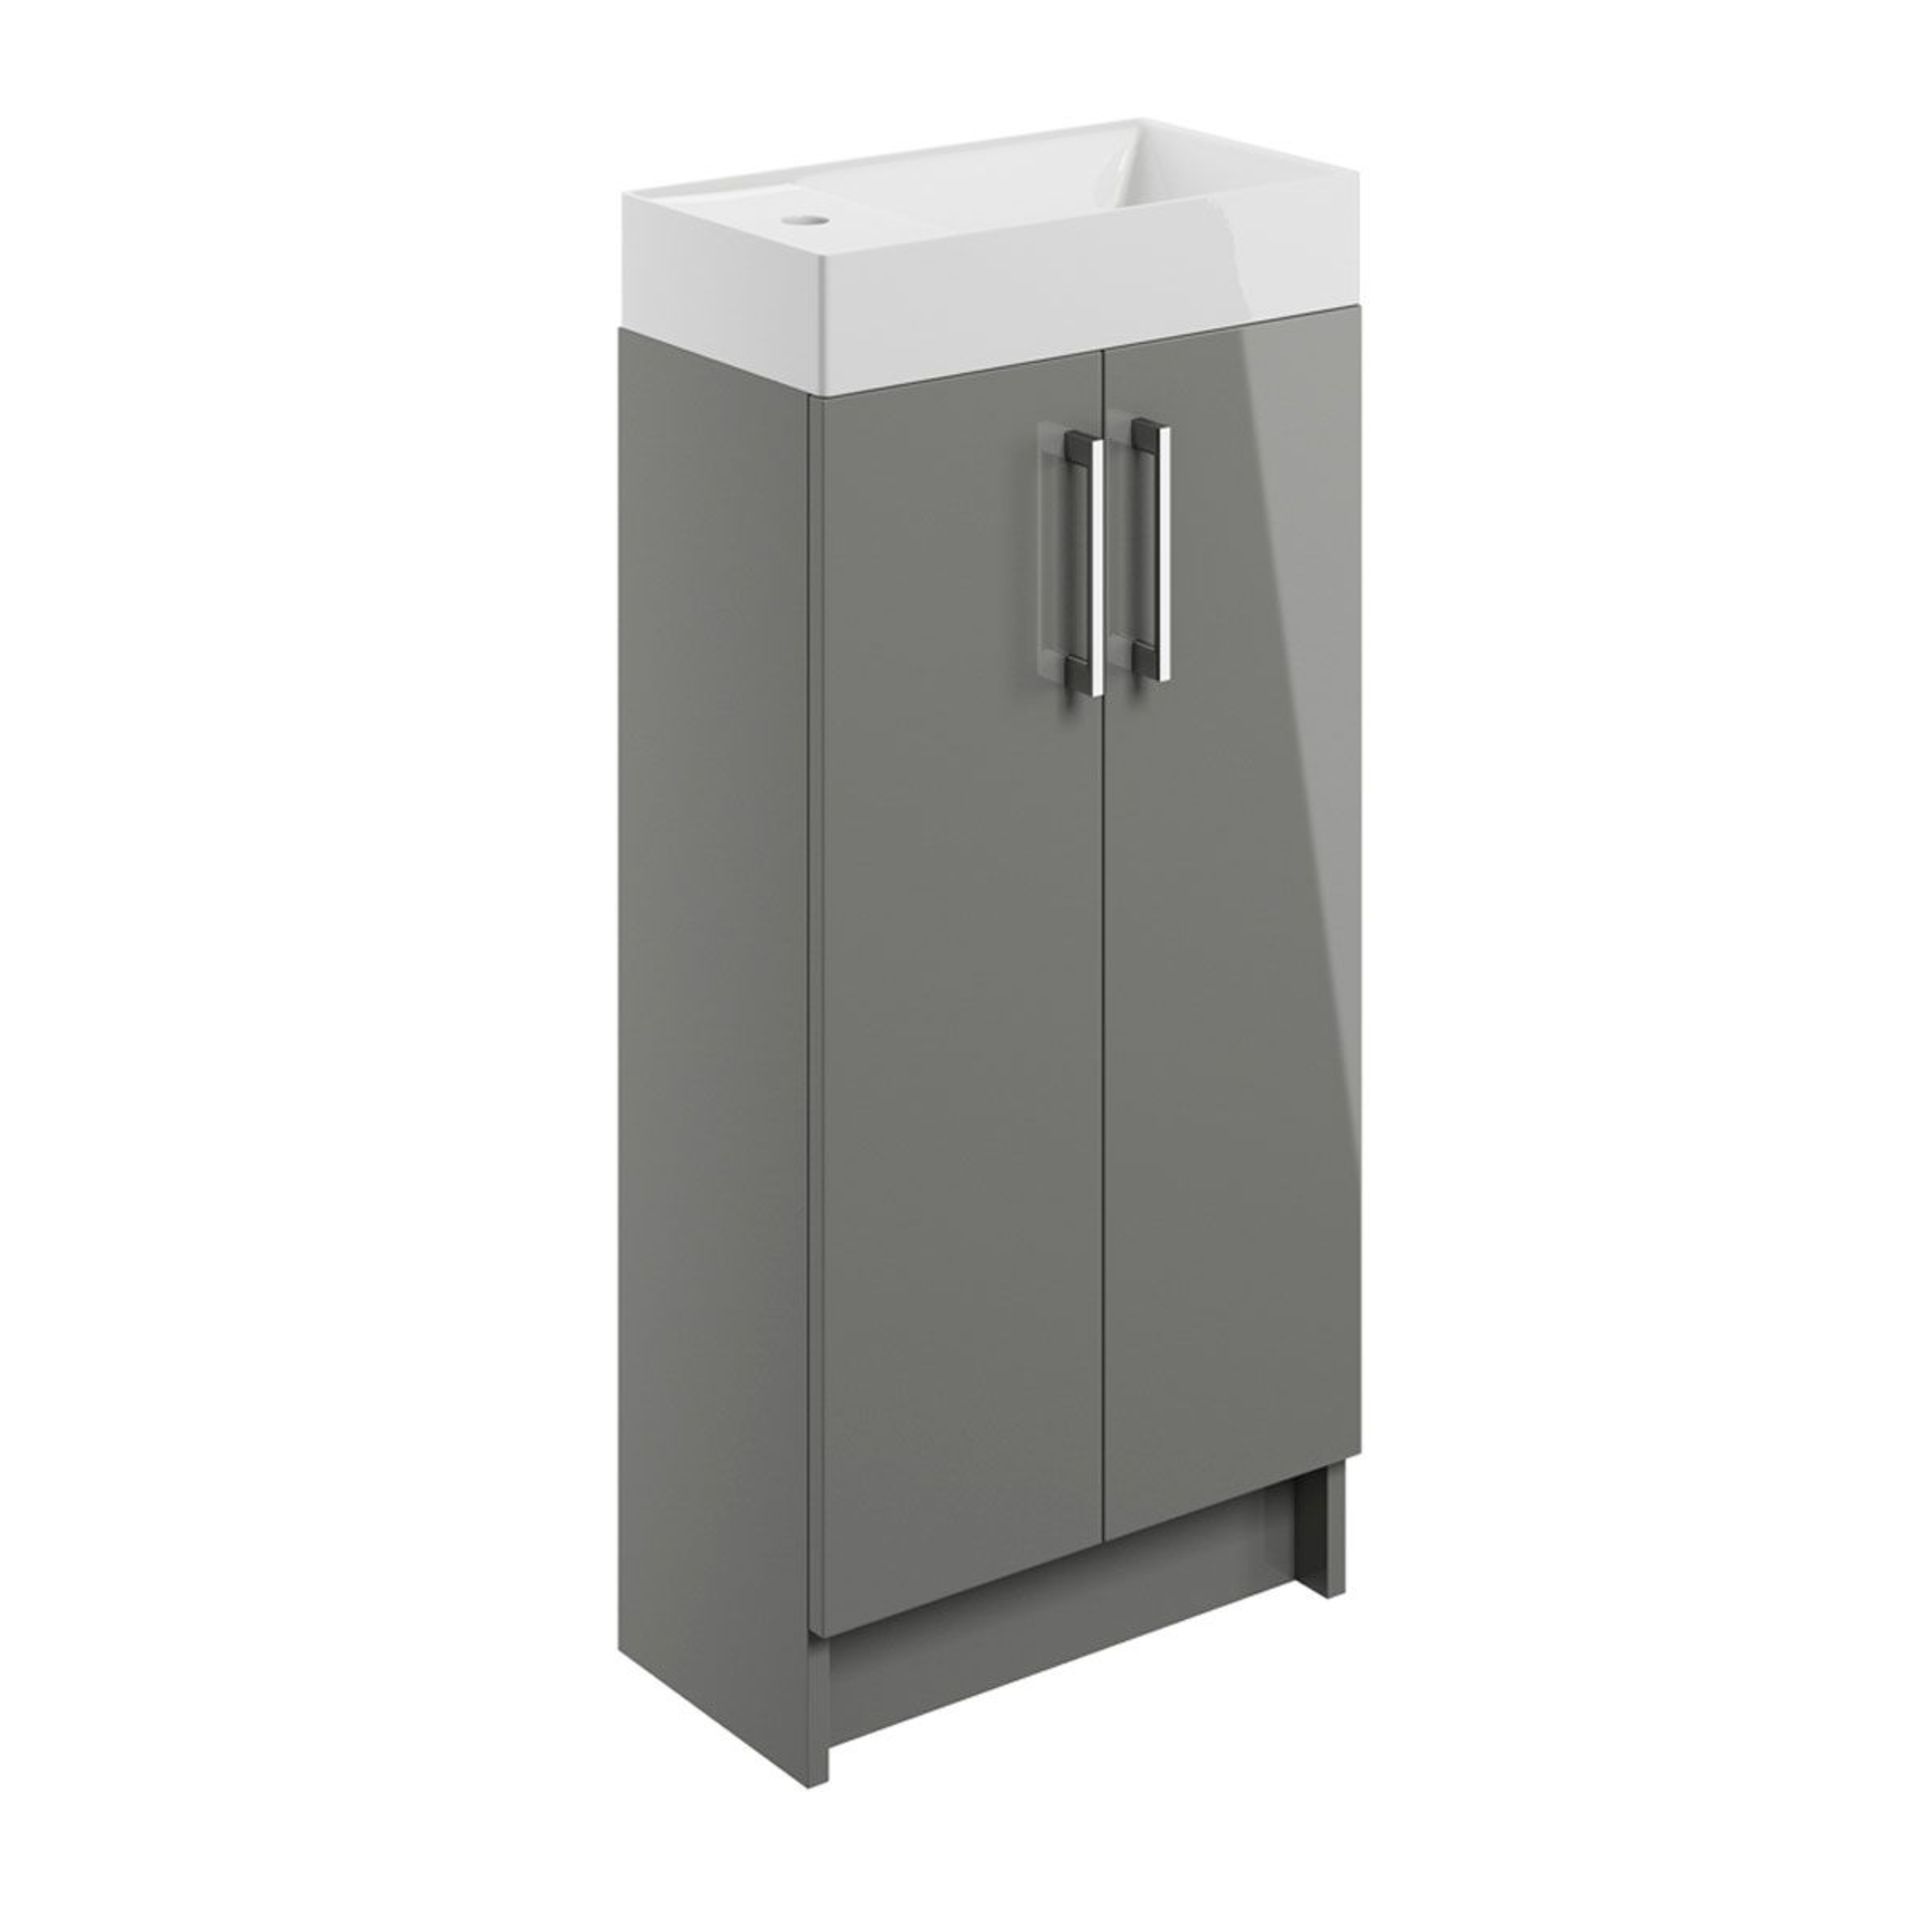 New (T14) Volta Grey Gloss Vanity Unit 400mm. RRP £225.00. Comes Complete With Basin. This Sop...